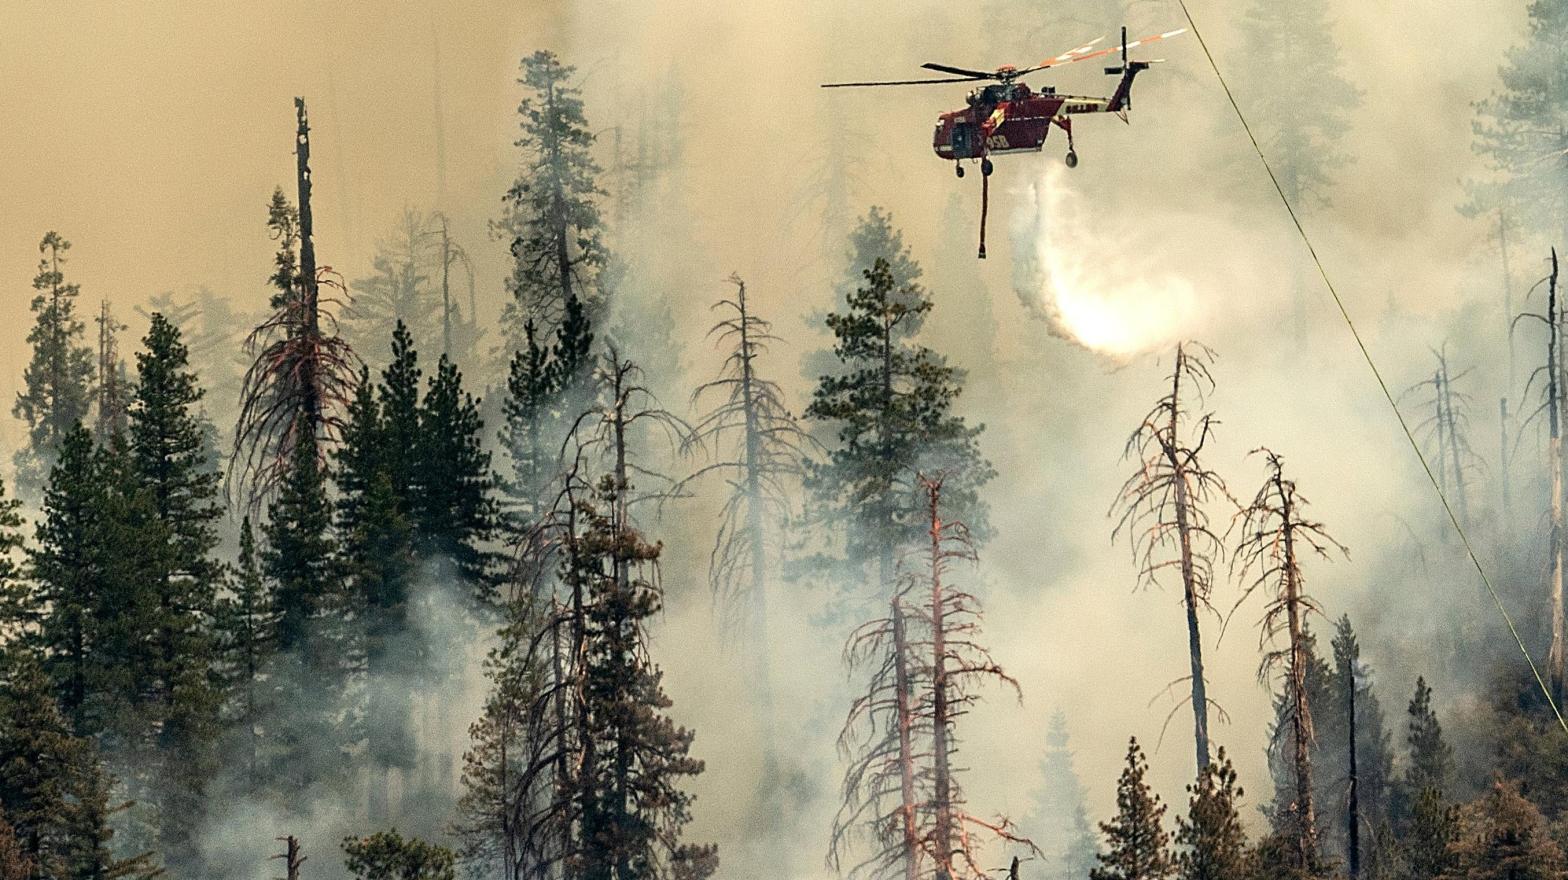 A helicopter drops water on the Washburn Fire in Yosemite National Park on July 9, 2022. (Photo: Noah Berger, AP)